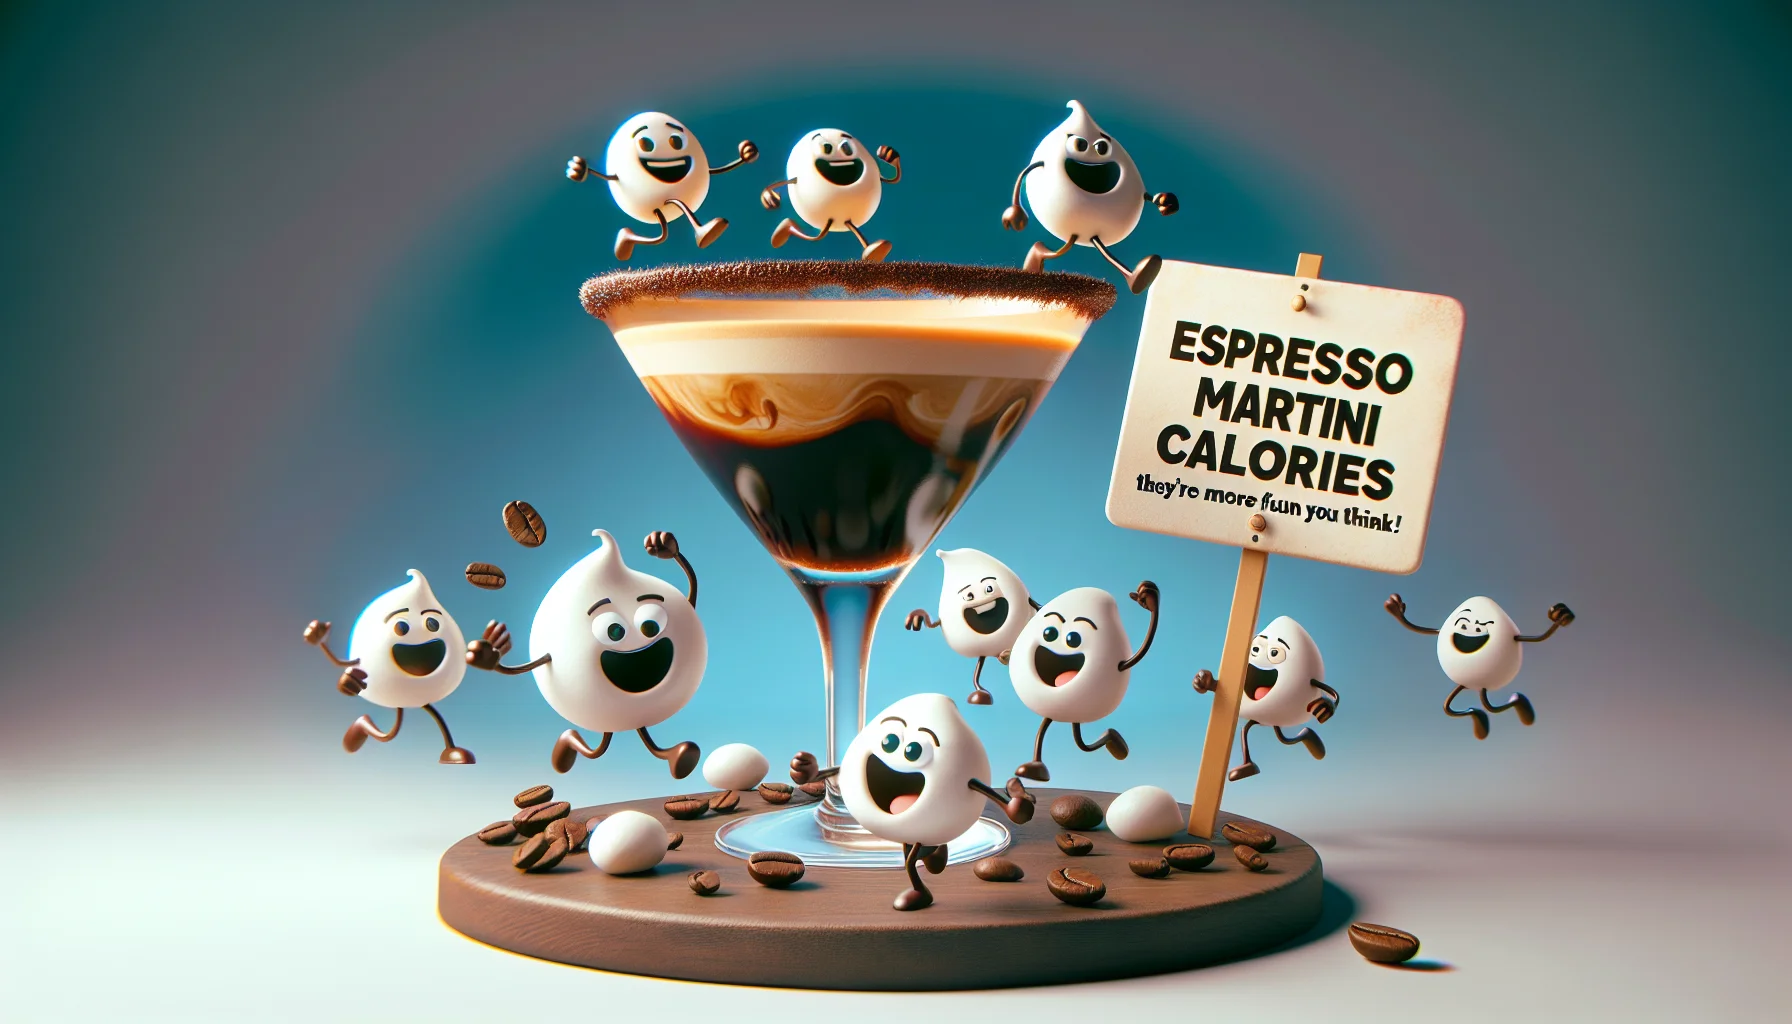 Create a humorously enticing image revolving around the theme of espresso martini calories. Imagine an animated cartoon style scene where a group of playful calories are personified as fun characters. They're jumping joyously, mid-air, out of a well-made espresso martini glass, inviting people to enjoy. You see an espresso martini in the center, its deep brown liquid swirling artistically in a clear glass border mounted with coffee beans on the rim. In the foreground, a neutral color humoristic sign reads 'Espresso Martini Calories - They’re more fun than you think!'